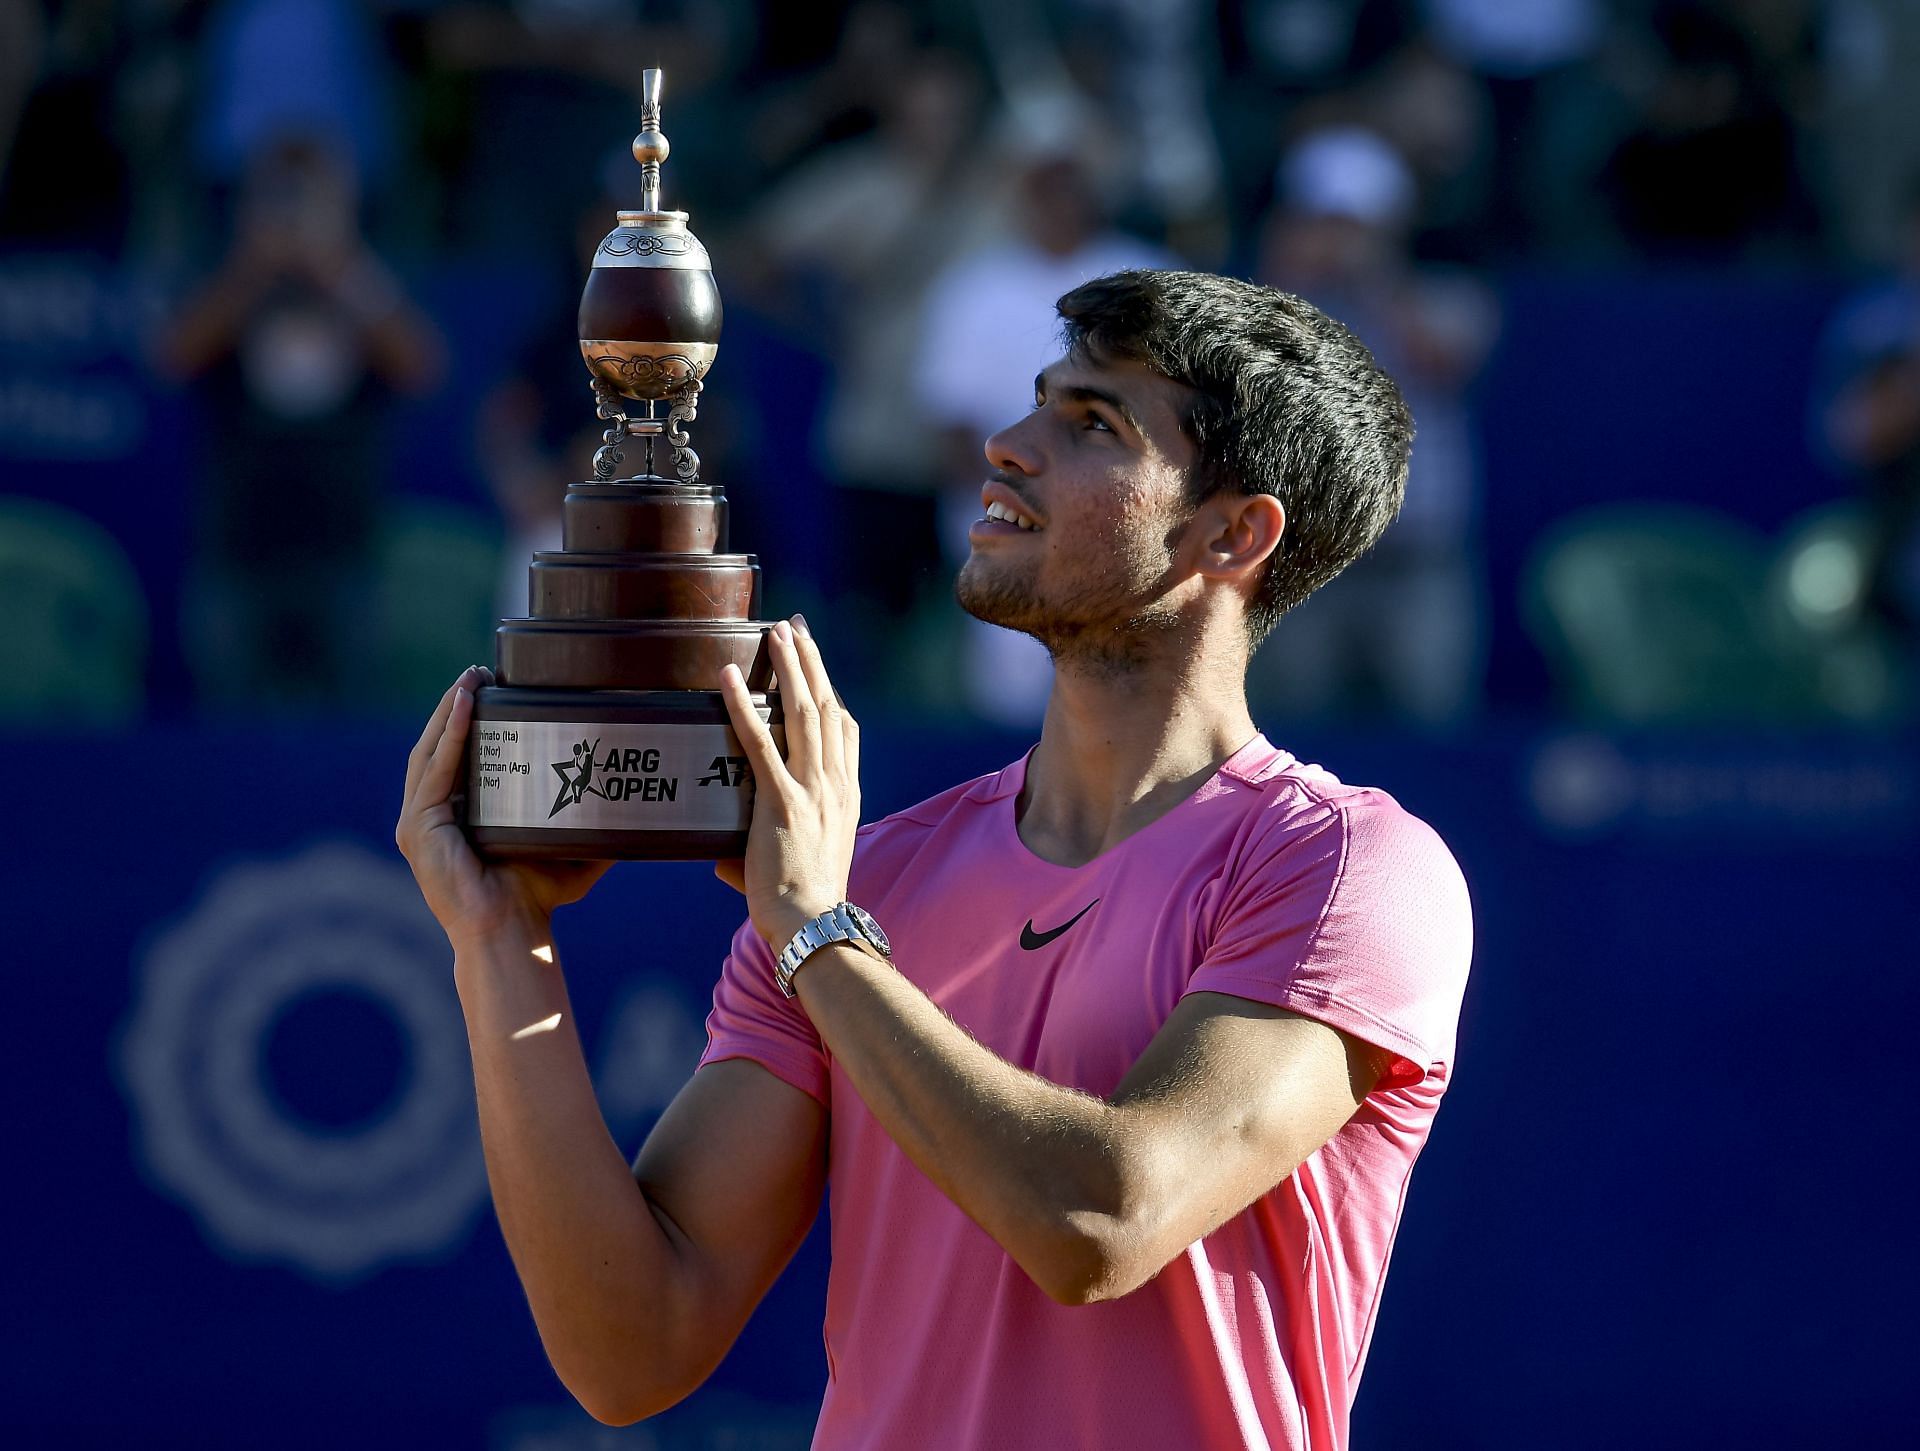 Carlos Alcaraz wins his first title of 2023 at the ATP 250 Argentina Open